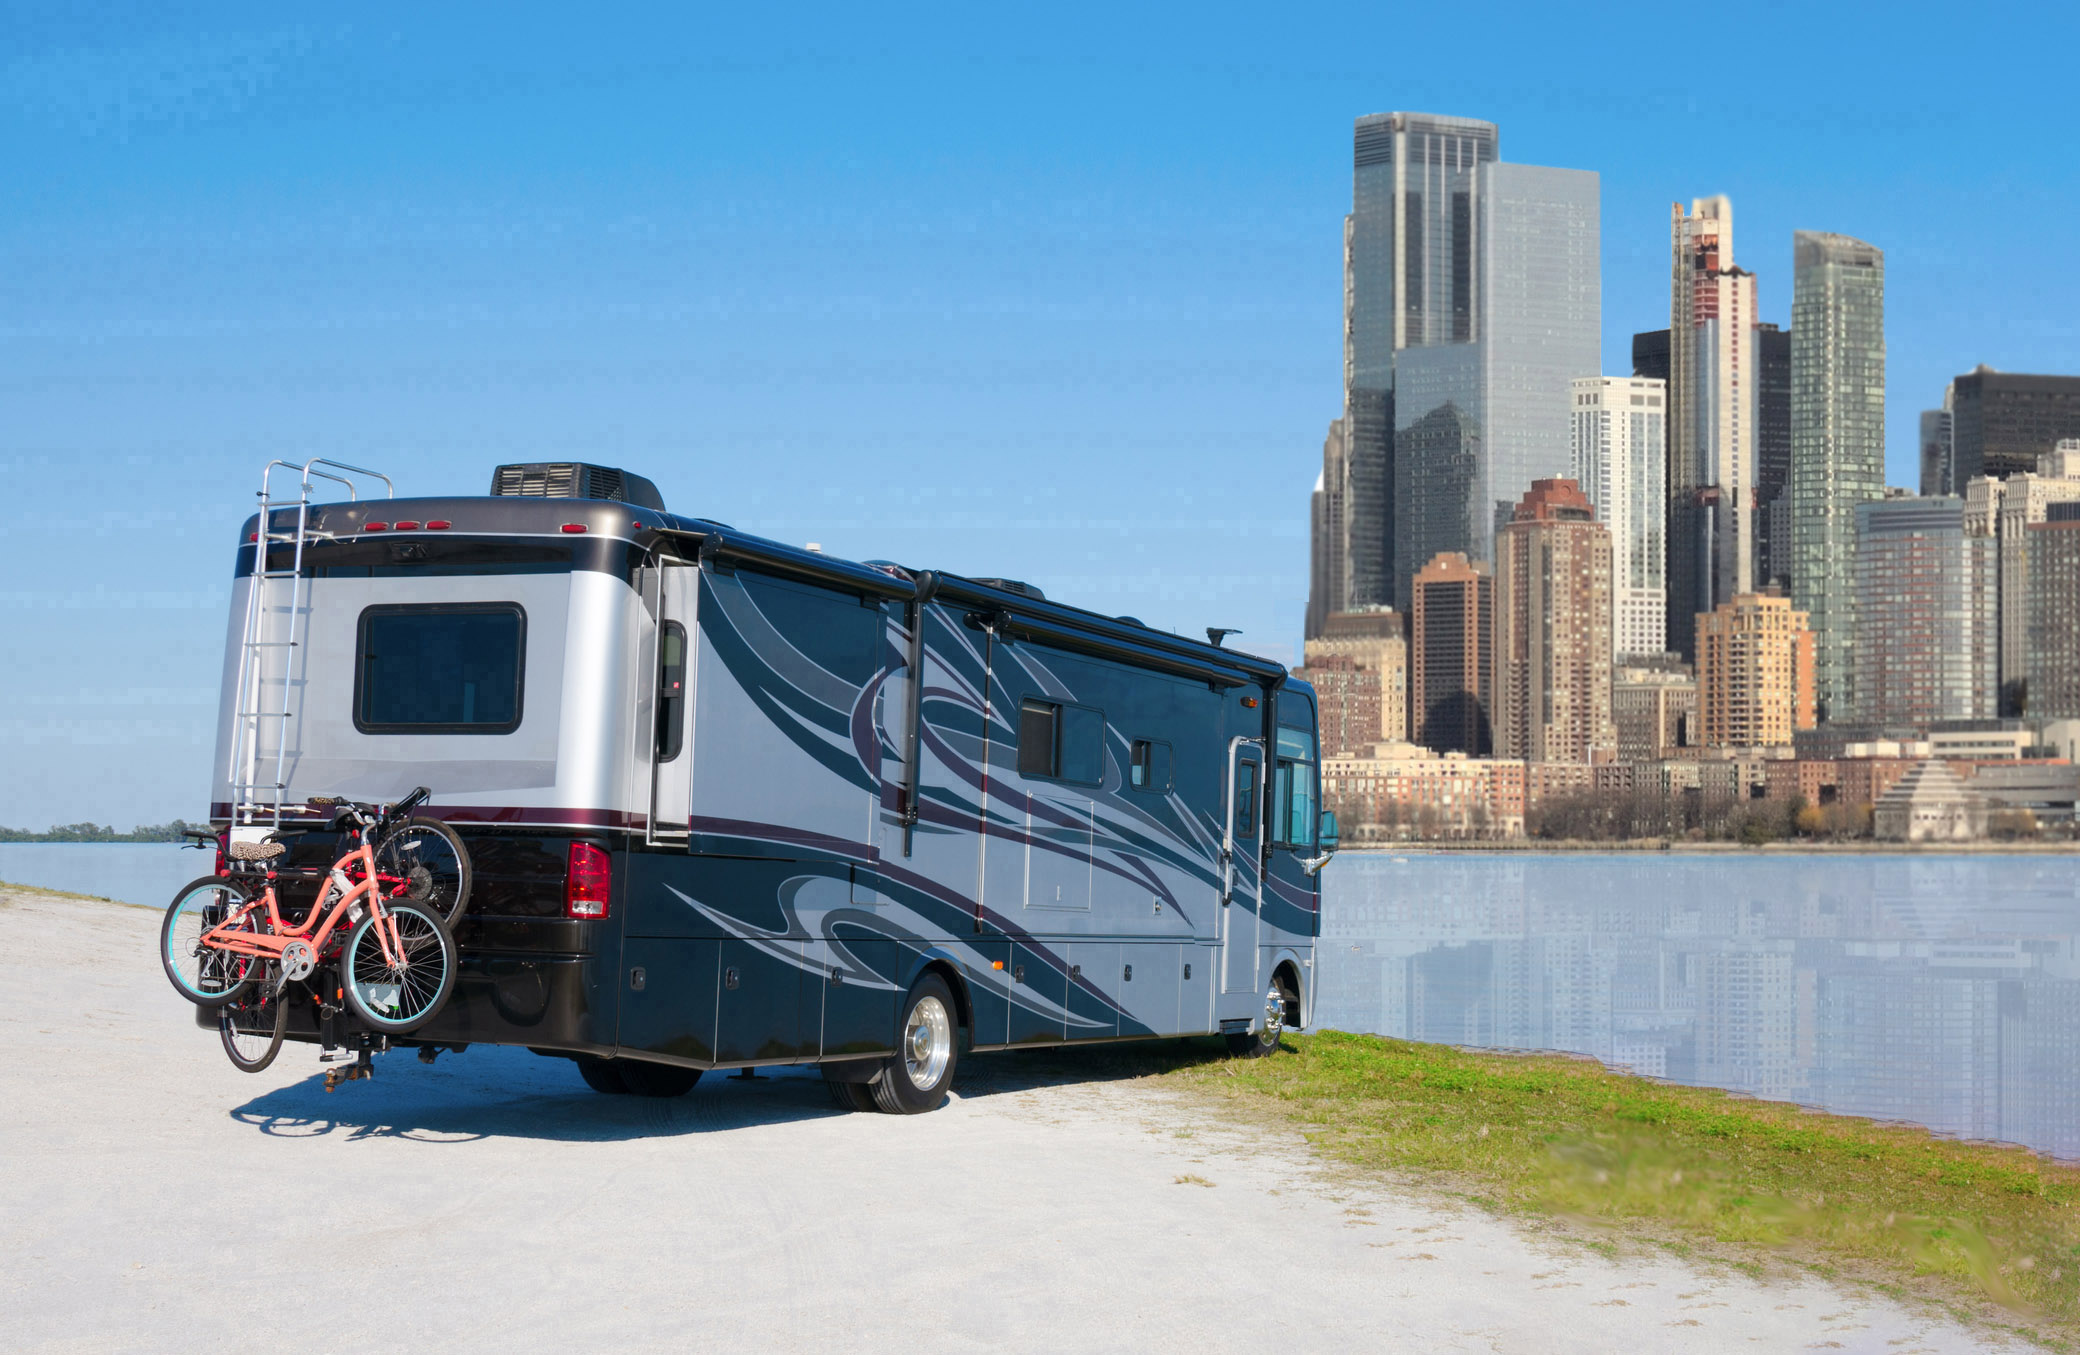 RV on a body of water facing a large metropolis